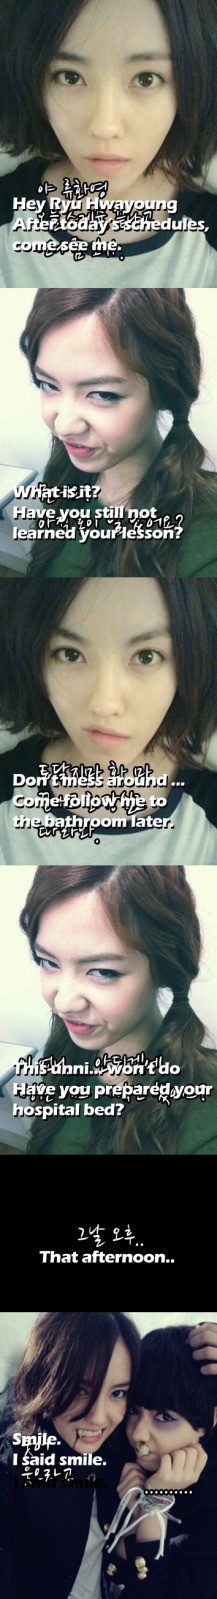 FAn T-Ara nìa... let enjoy !! :x  - Page 2 T-ara+hyomin+and+hwayoung